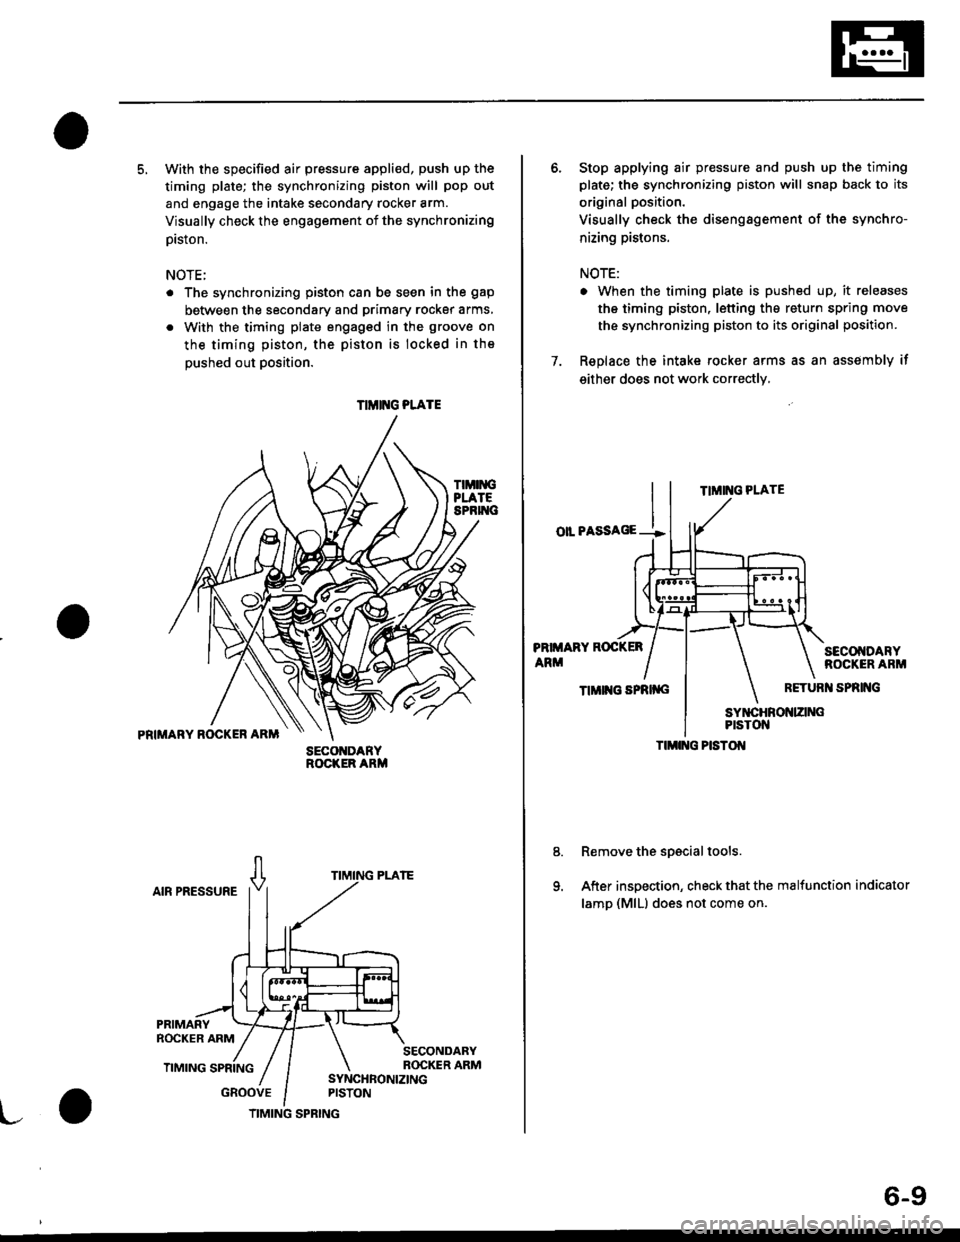 HONDA CIVIC 1998 6.G Workshop Manual 5. With the specified air pressure appli€d, push up the
timing plate; the synchronizing piston will pop out
and engage the intake secondary rocker arm.
Visually check the engagement of the synchroni